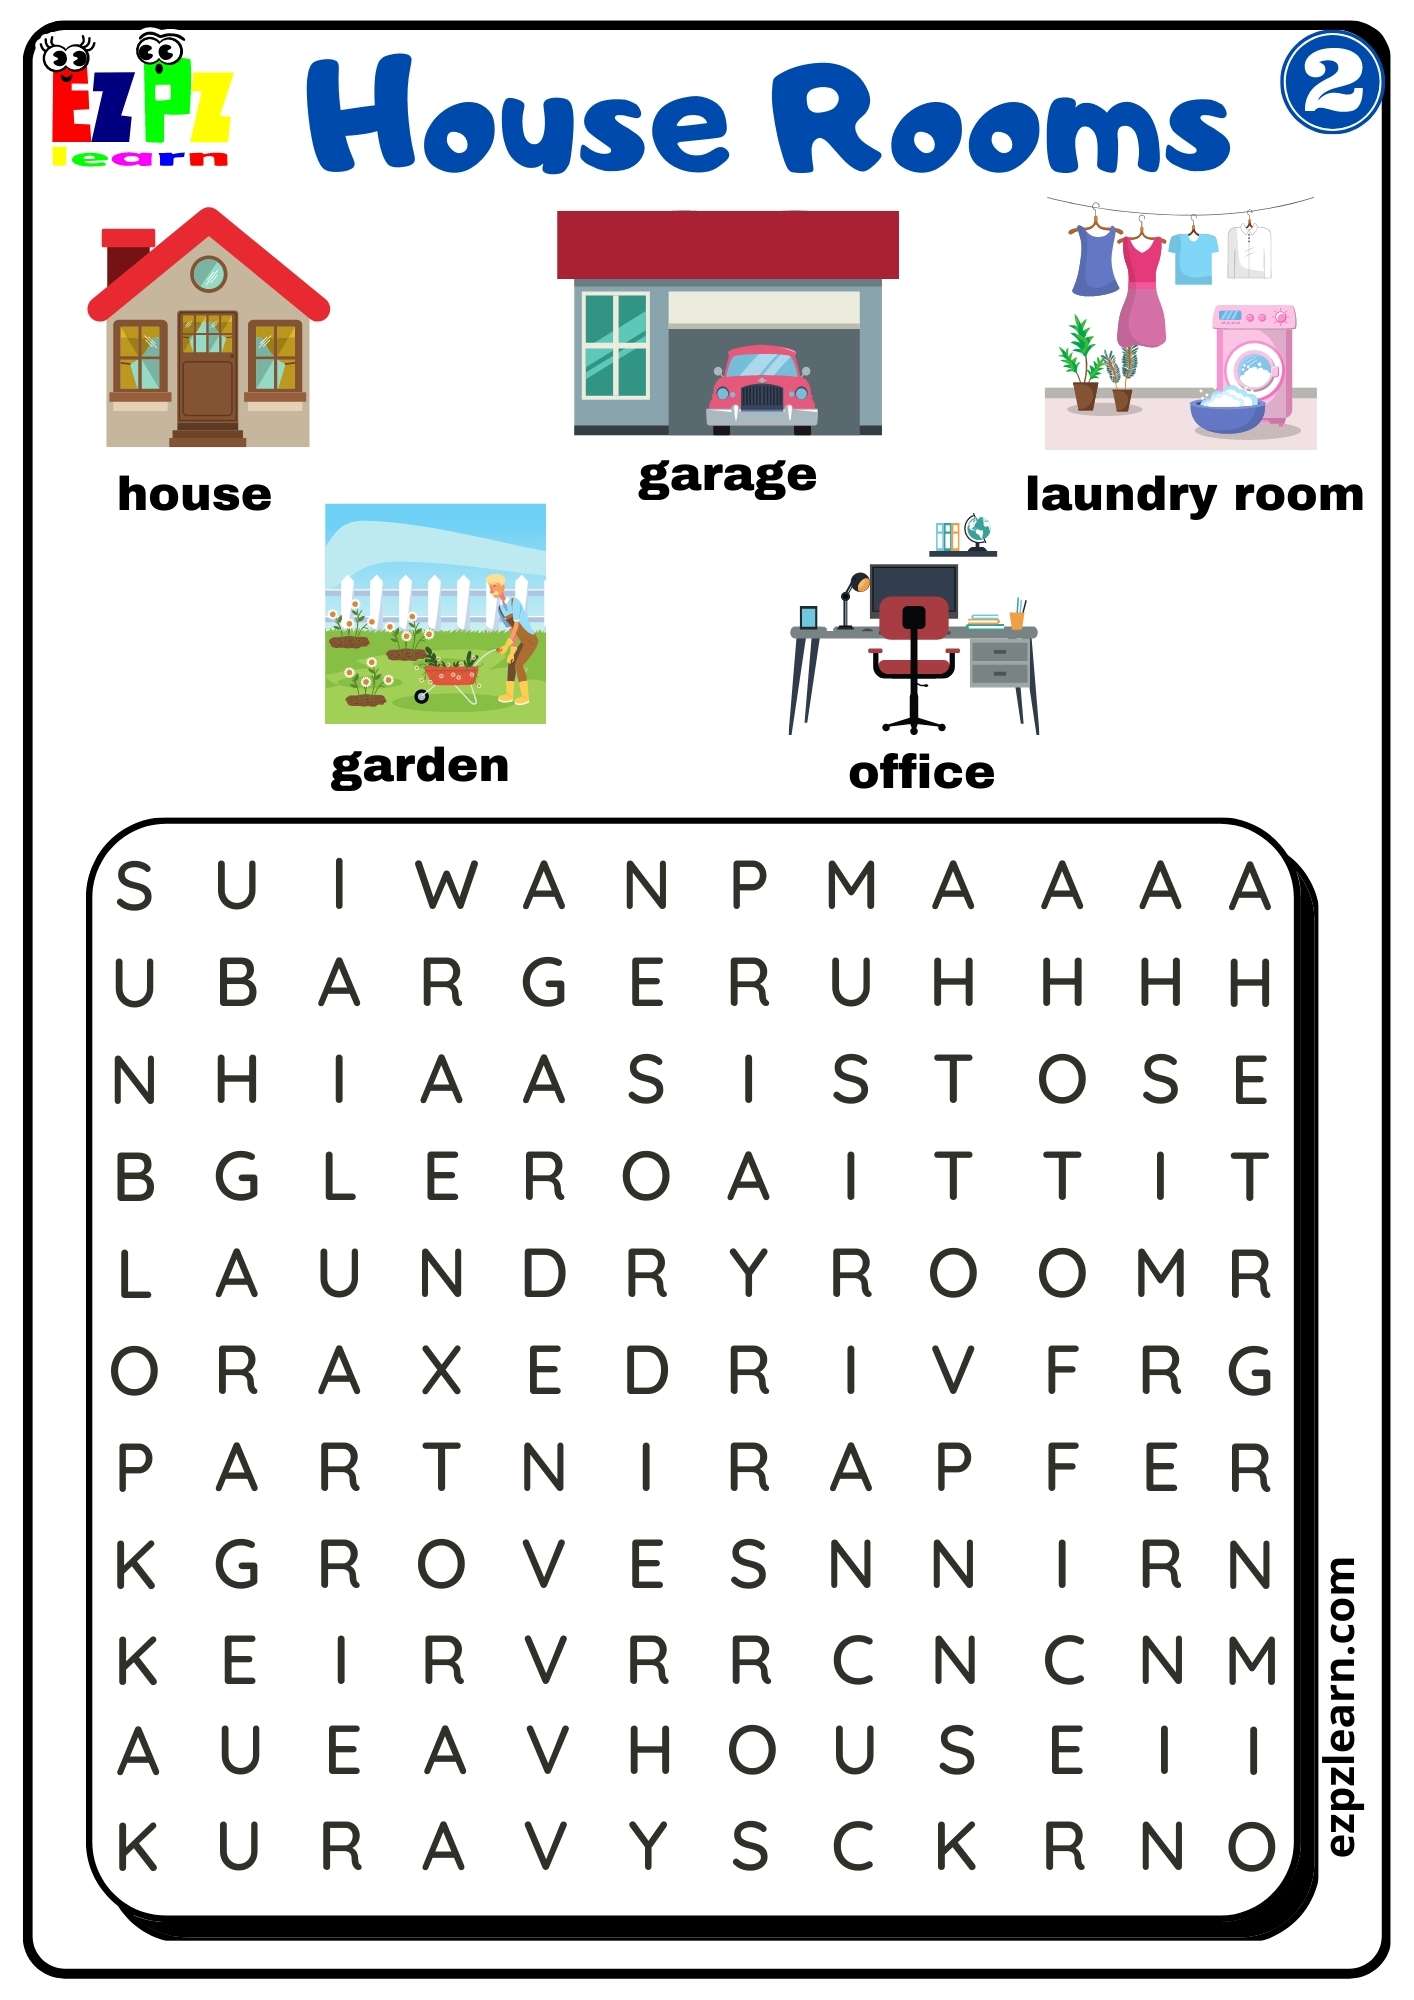 Parts Of The House, Thing In The Bedroom Free Activities online